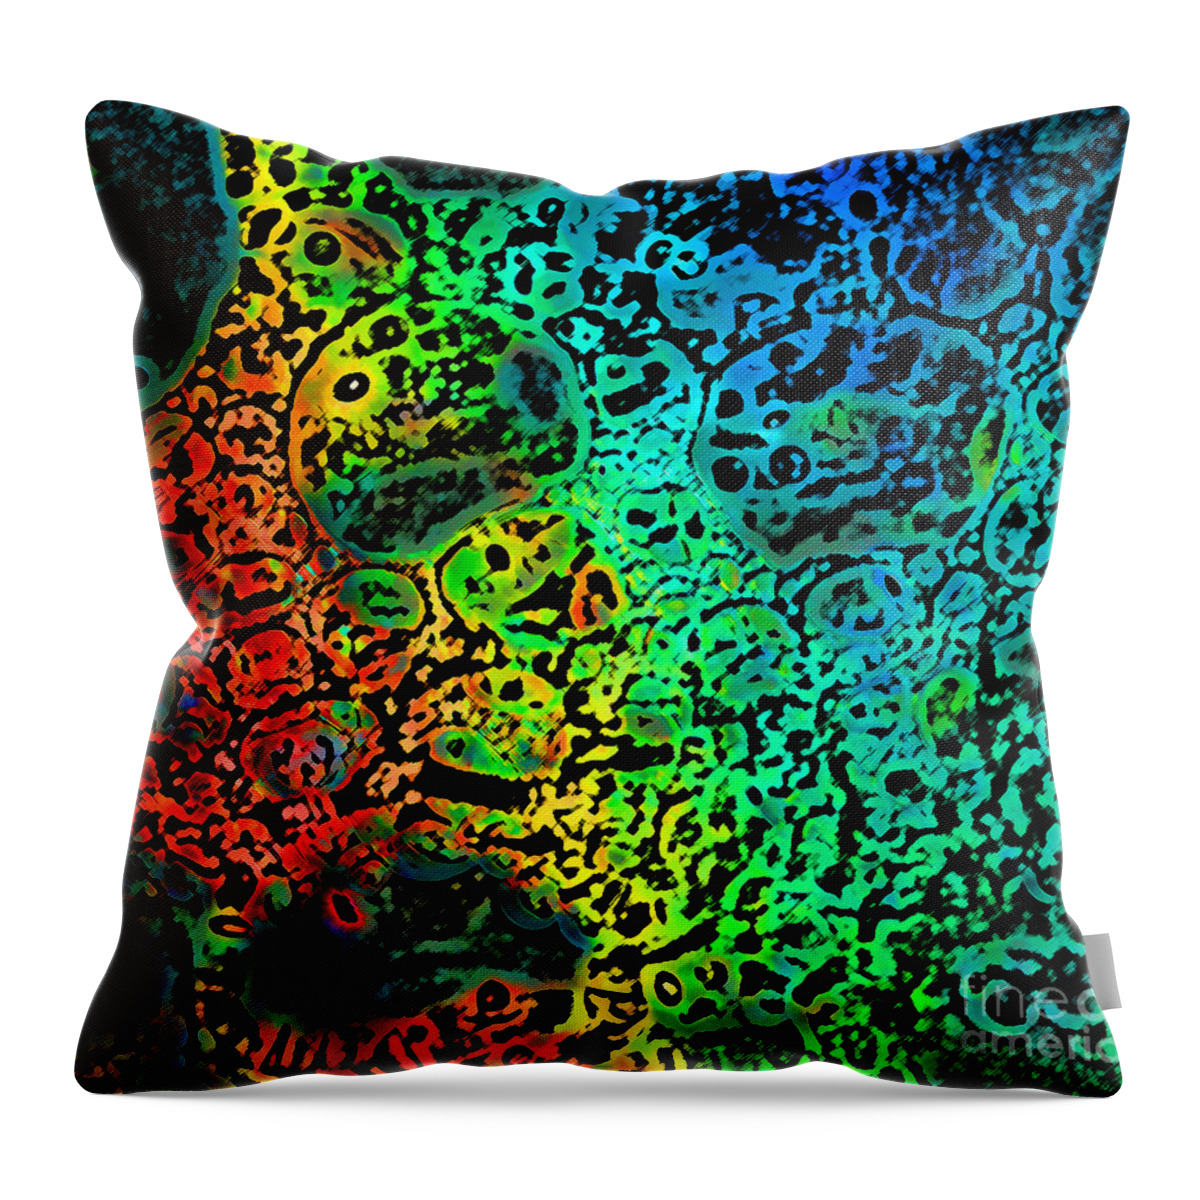 Photography Throw Pillow featuring the photograph Bubble Design by Jeanette French